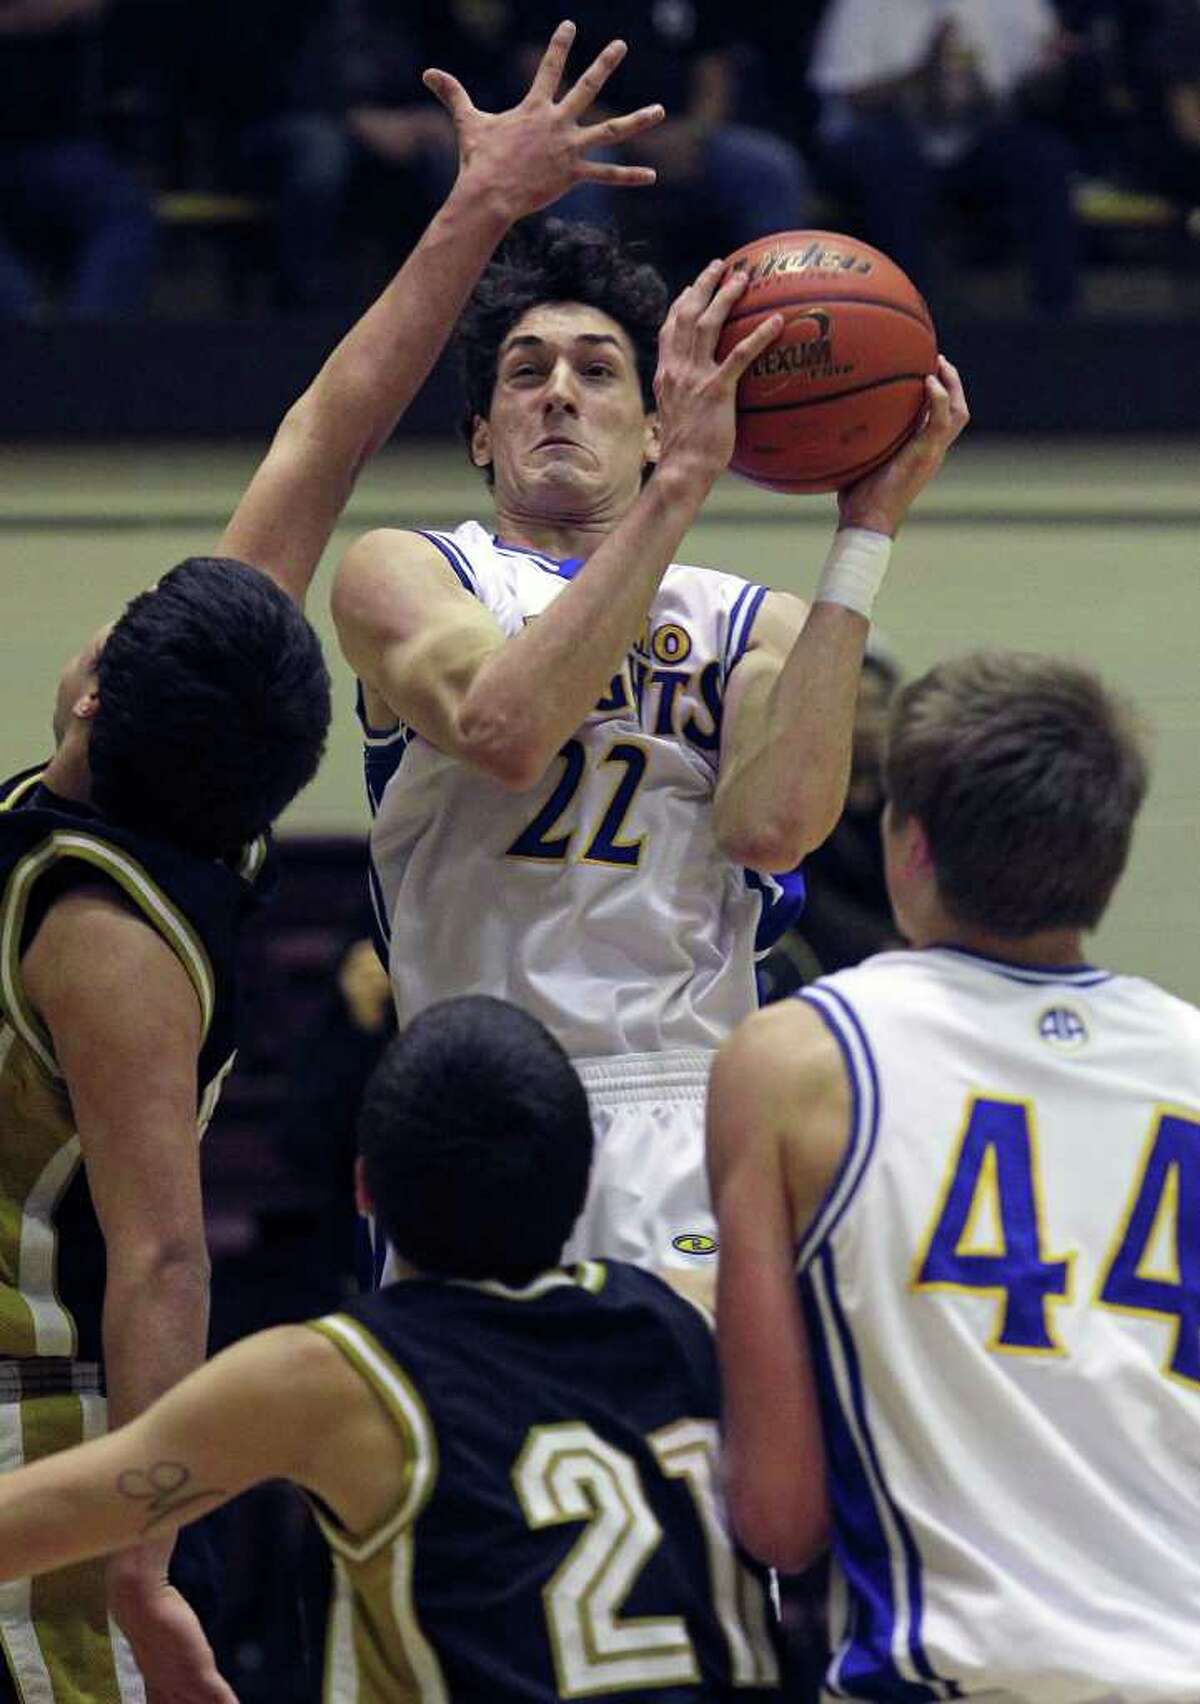 Jeffrey Rodewald goes up in a crowd for a bucket as Alamo Heights beats Edison 50-39 in Region IV 4A finals at Littleton Gym on March 3, 2012 Tom Reel/ San Antonio Express-News